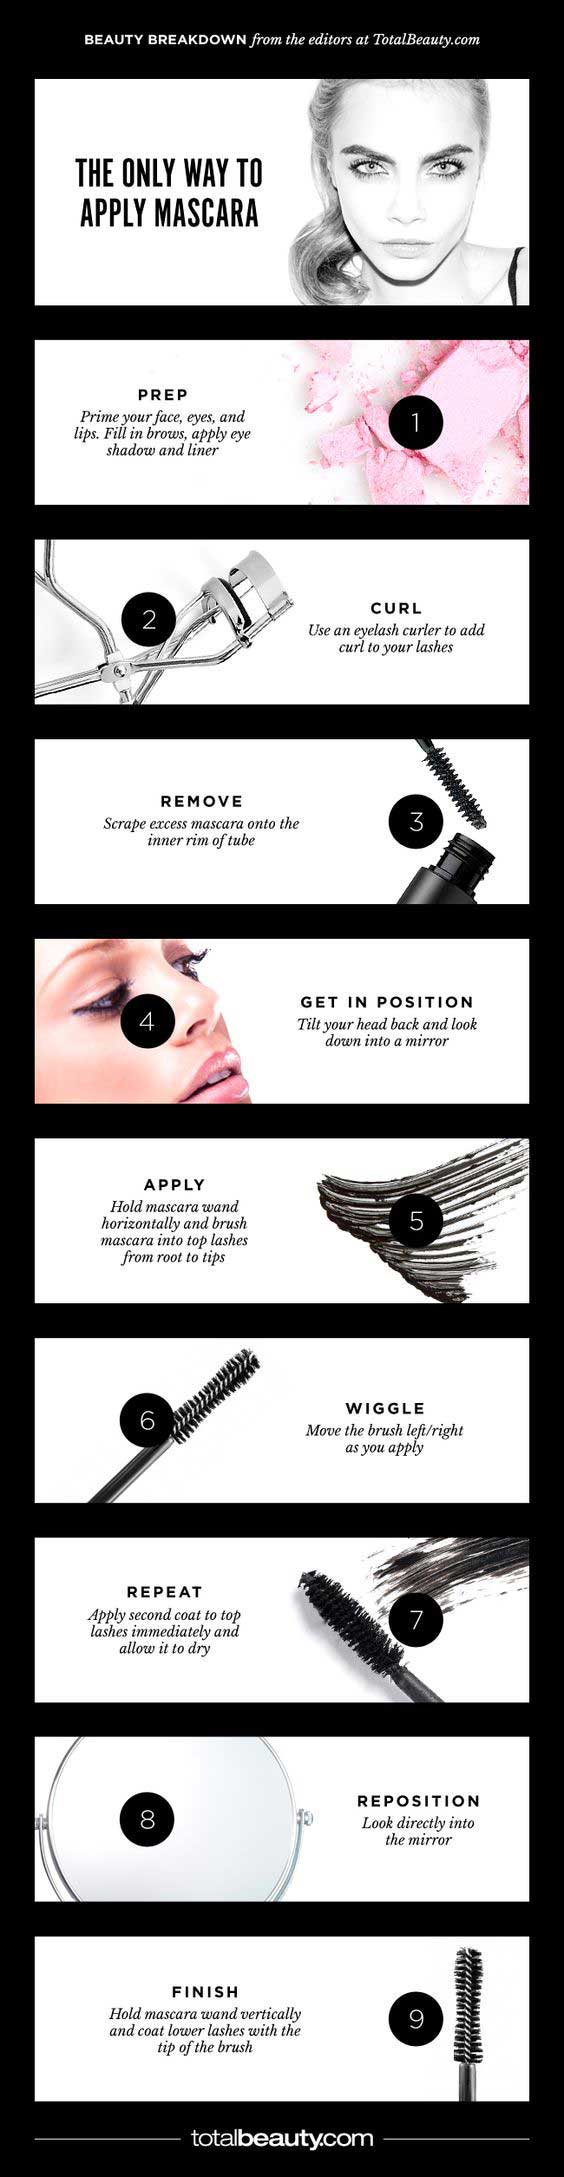 If you're looking for the best mascara tips to teach you how to apply mascara perfectly, you search ends here!